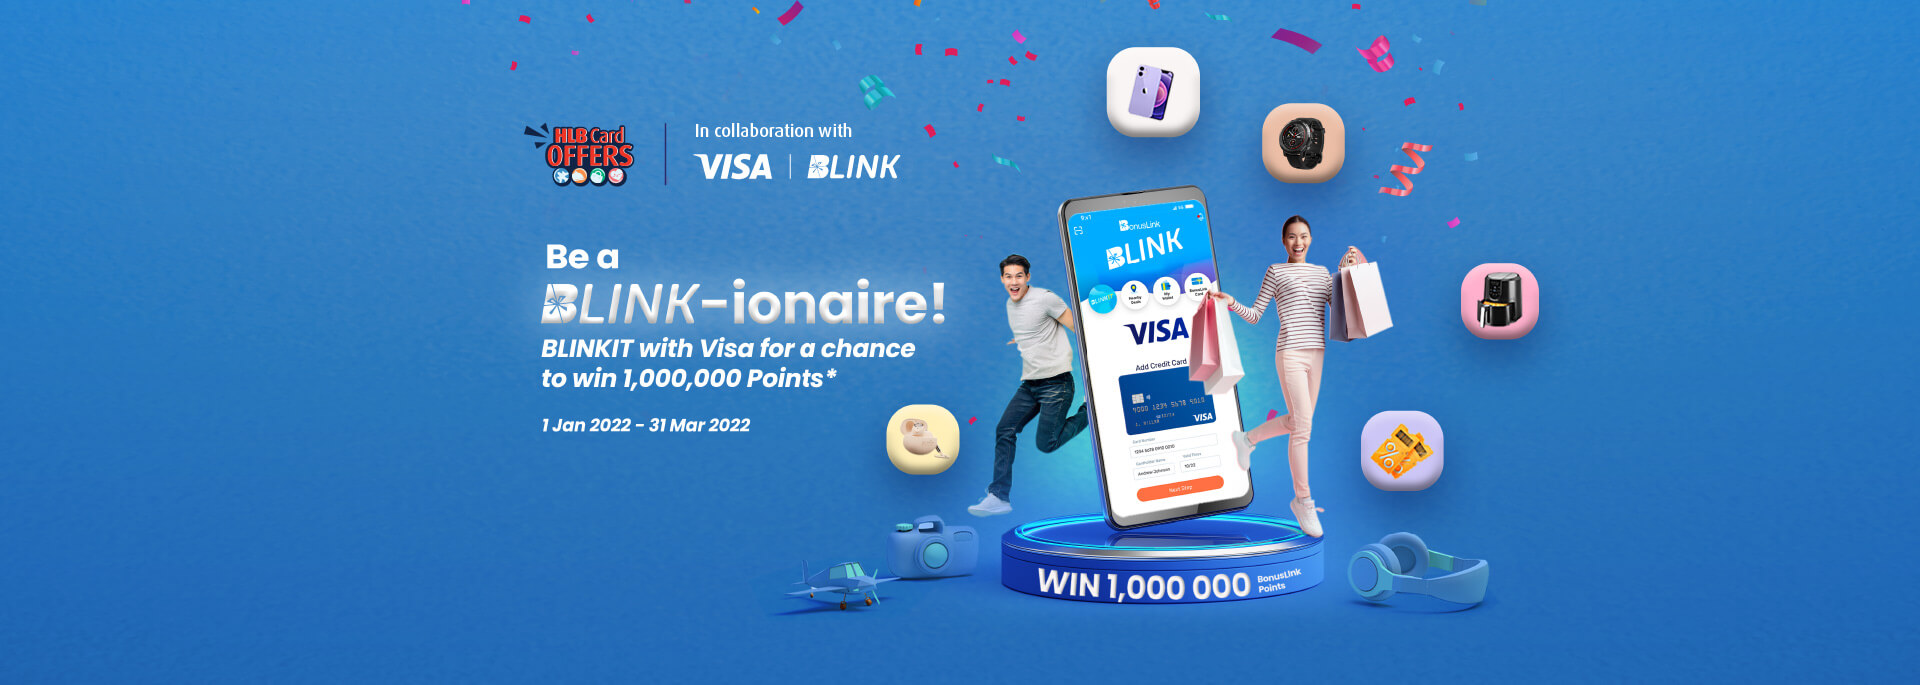 Be a BLINK-ionaire!